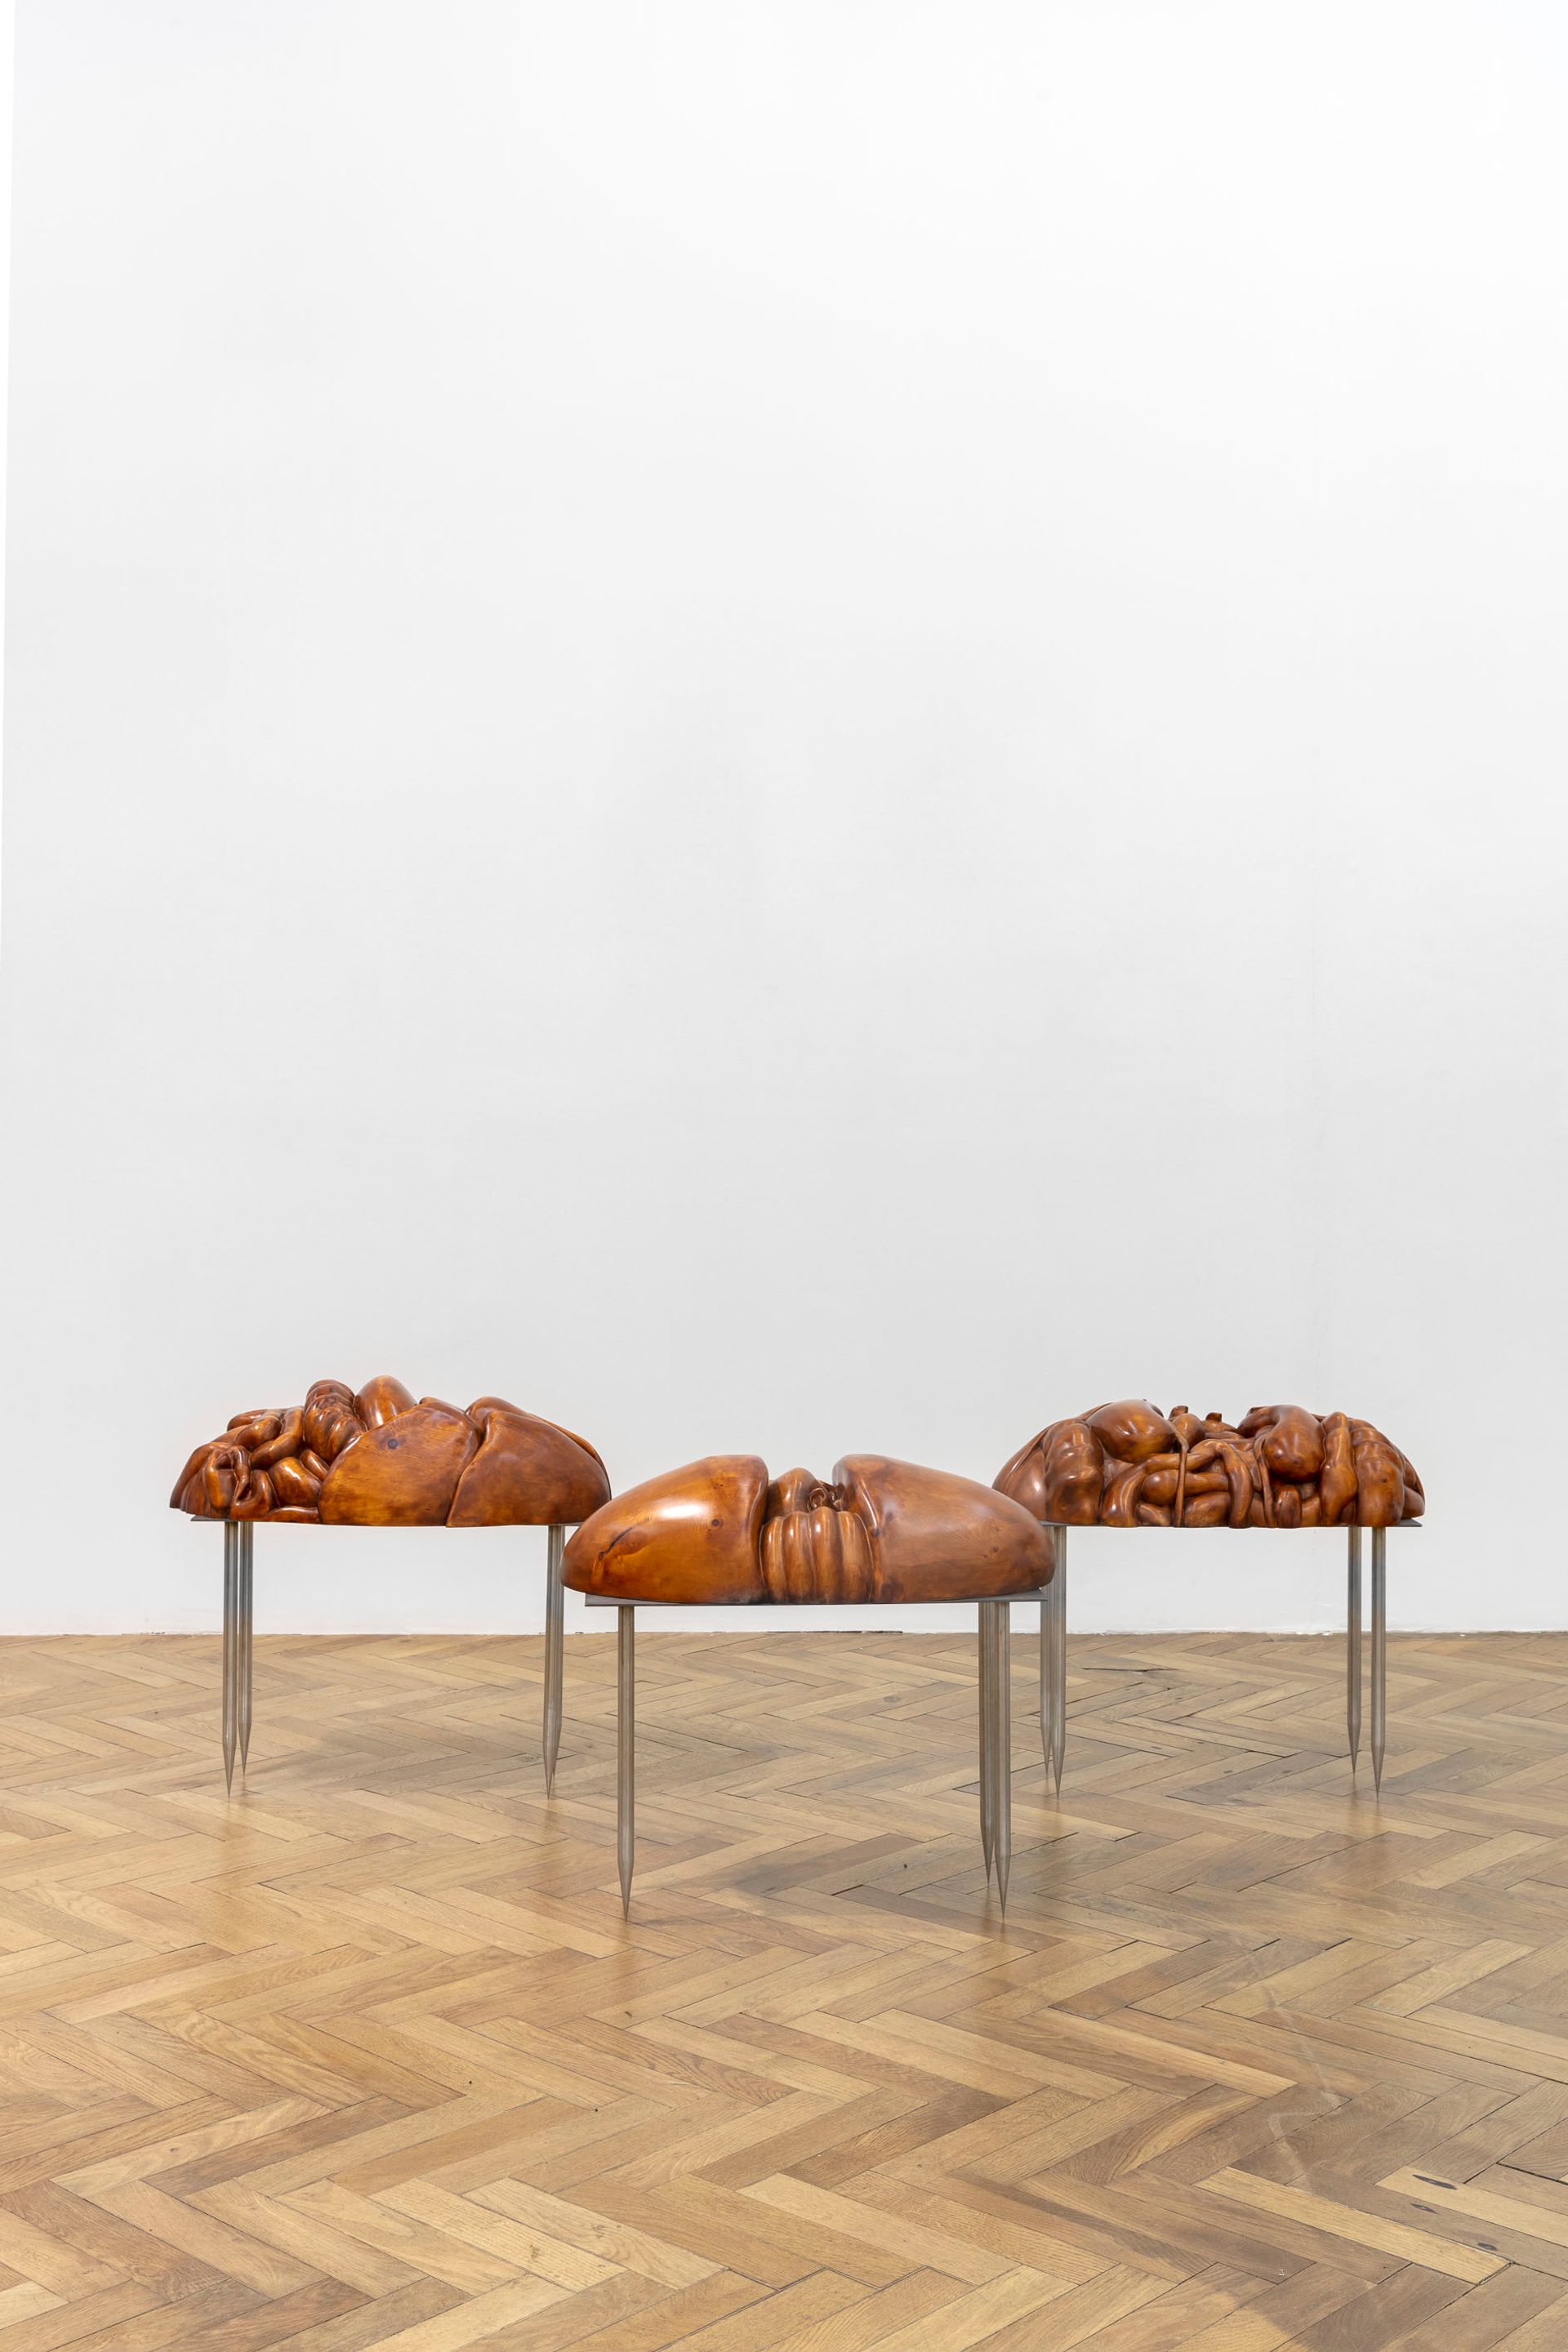 Pakui Hardware, Antidote, 2020, wood, stainless steel pedestal (50cm), each ca. 20 × 80 × 40 cm, Courtesy the artists and Carlier | Gebauer (Berlin/ Madrid)